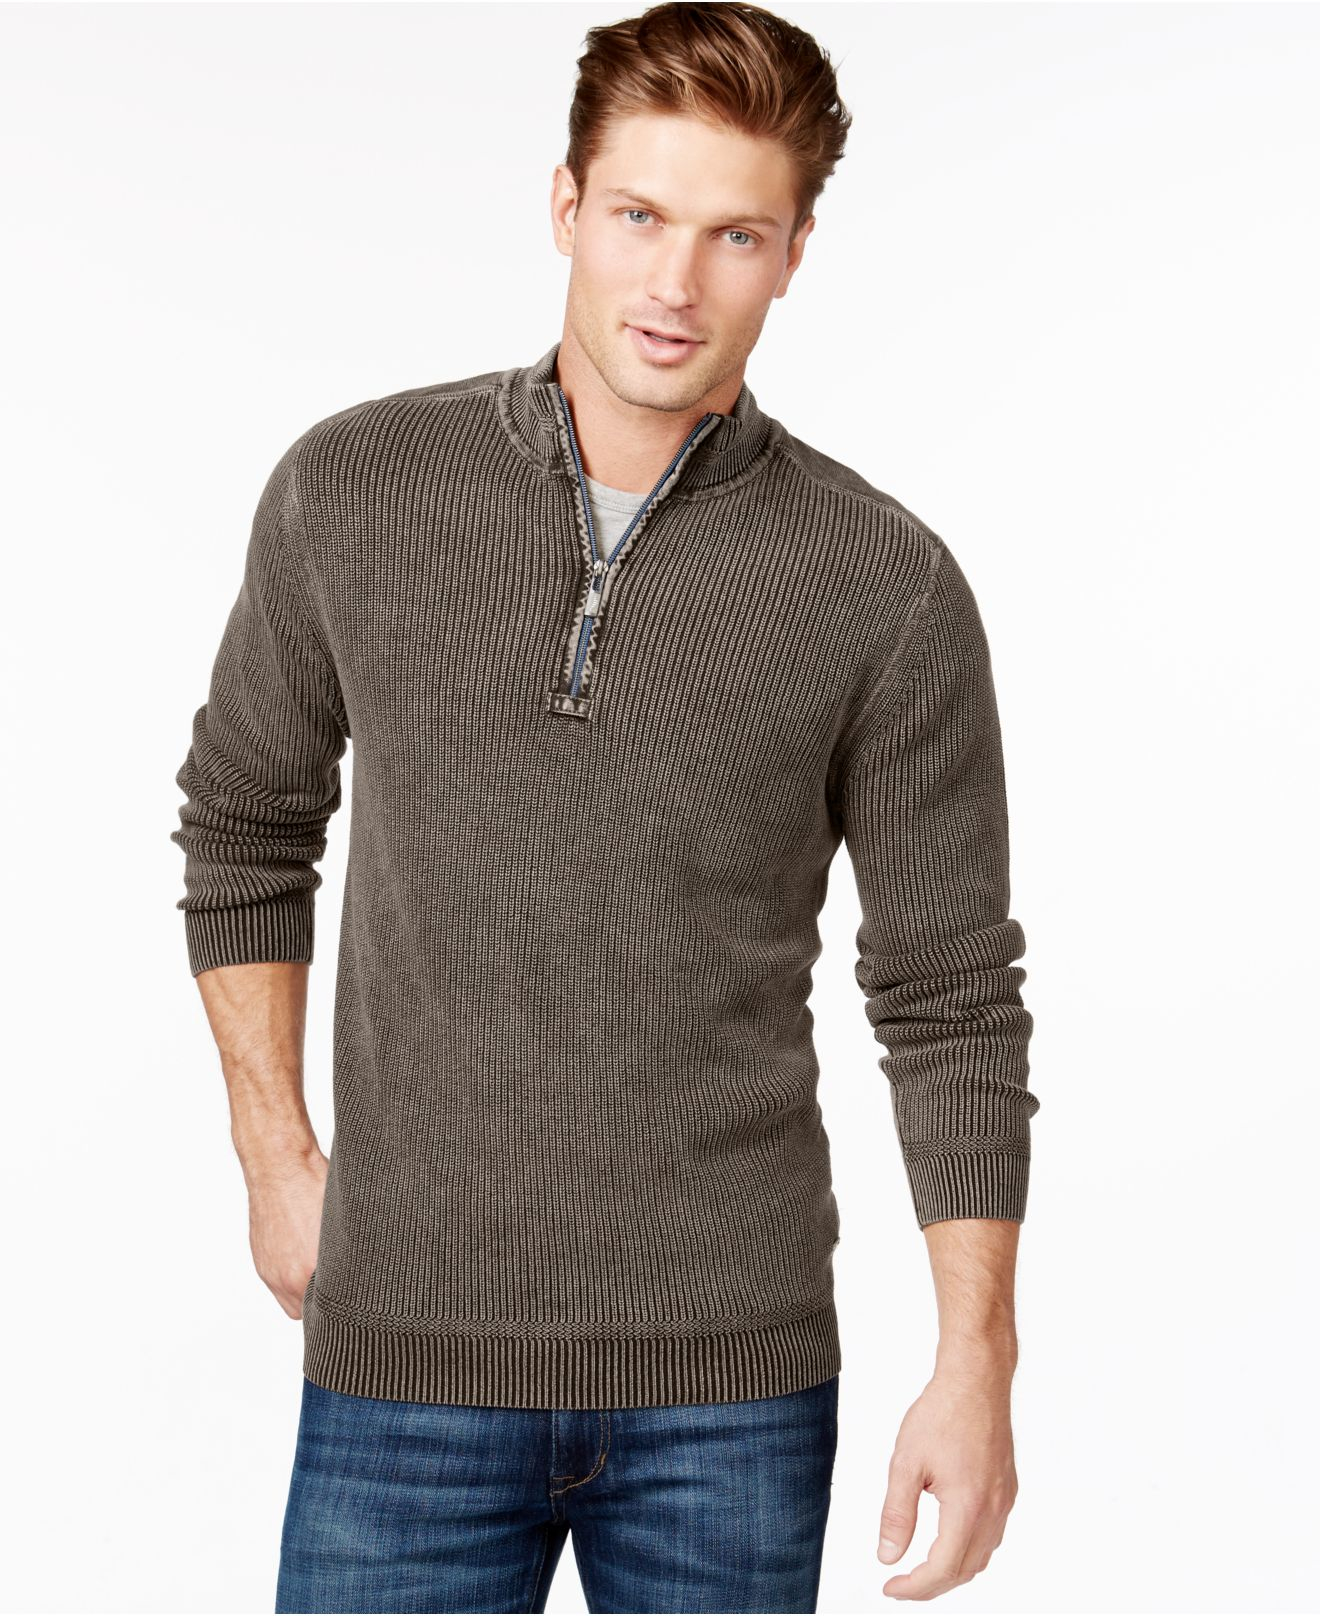 Lyst - Tommy Bahama New East River Quarter-zip Sweater in Brown for Men